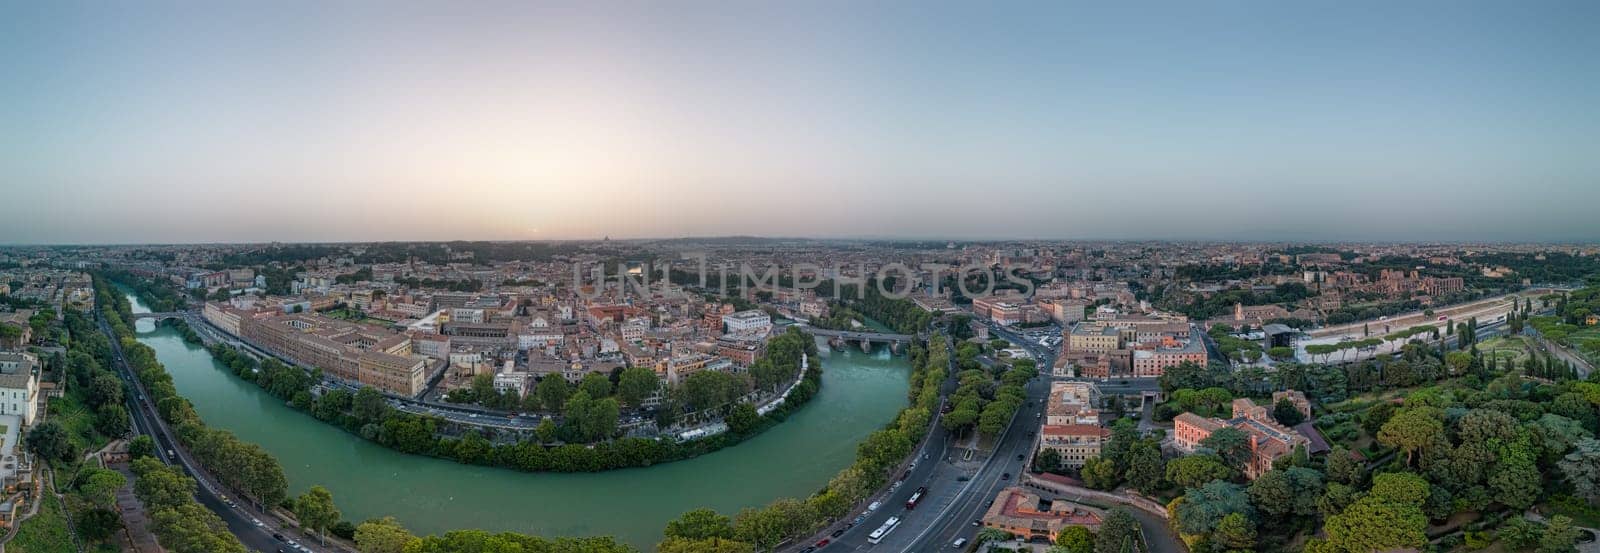 Rome and the Tiber in the evening at sunset. View from the Orange Garden